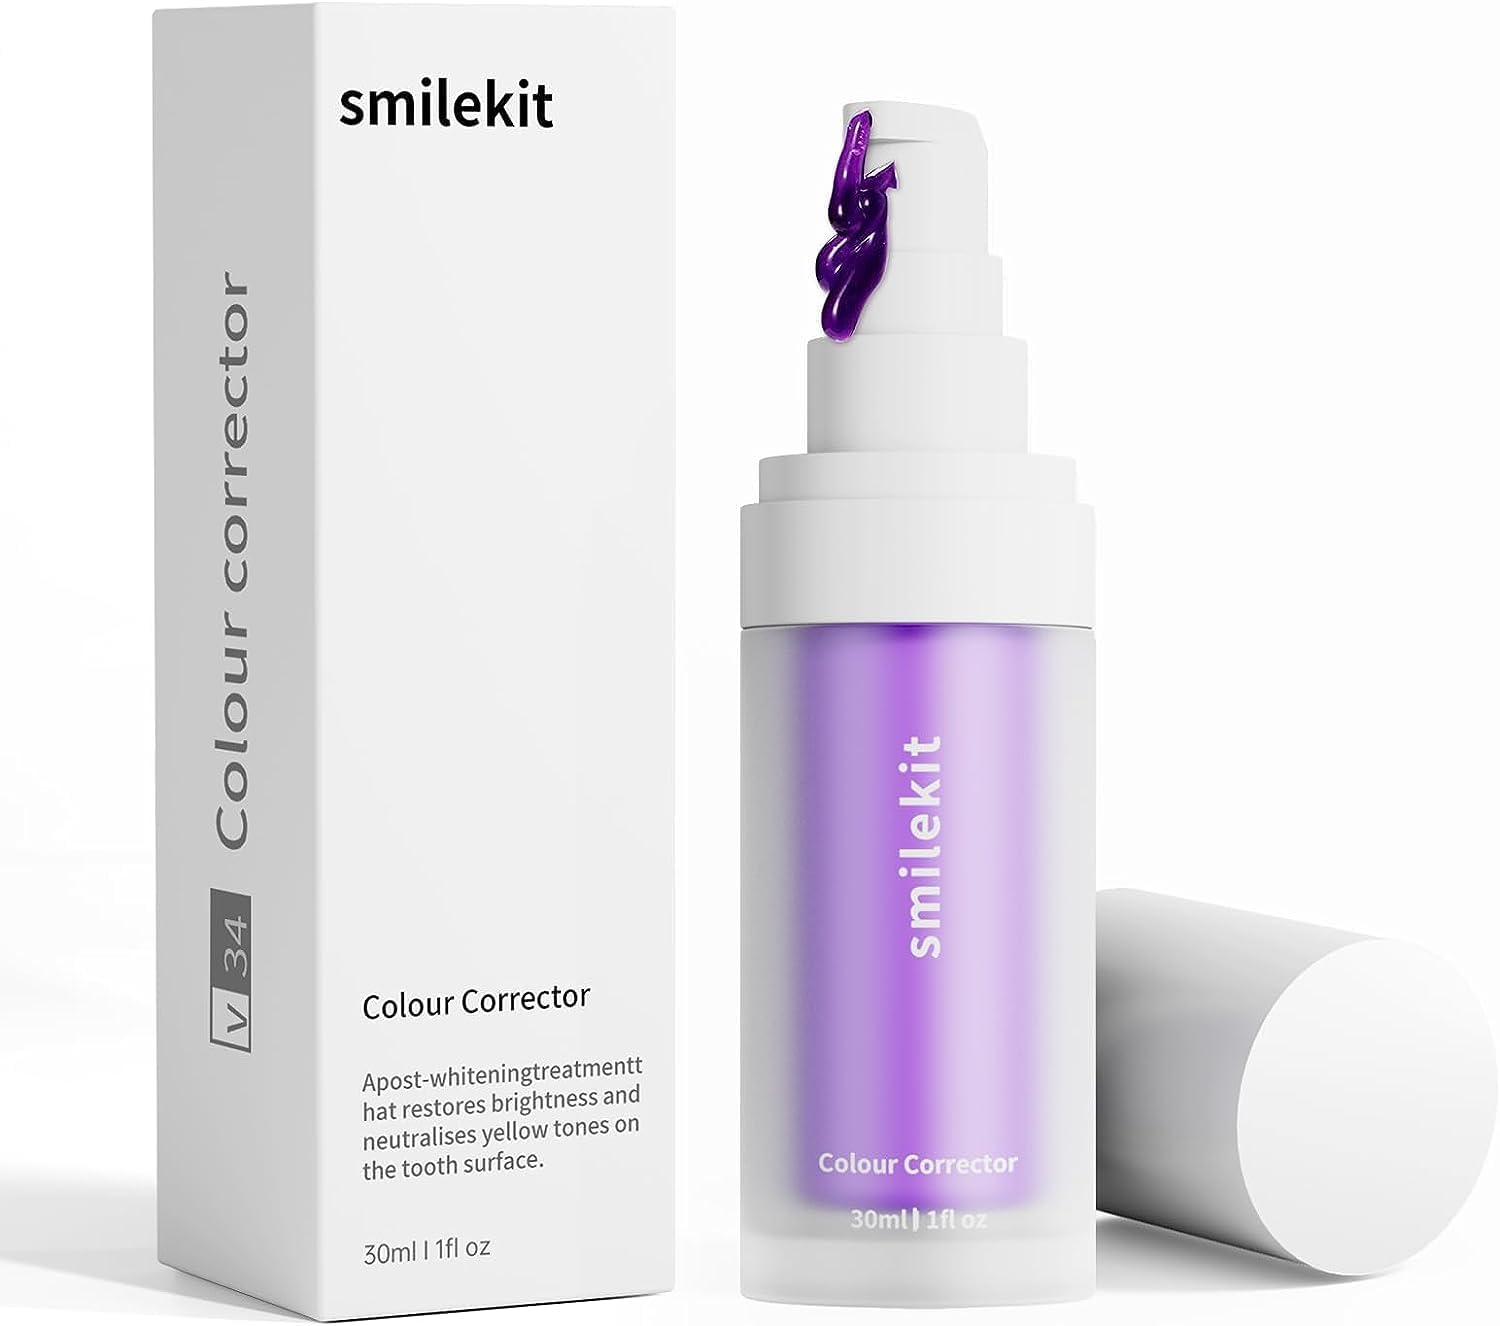 Product image of SmileKit V-34 Colour Corrector, a purple toothpaste